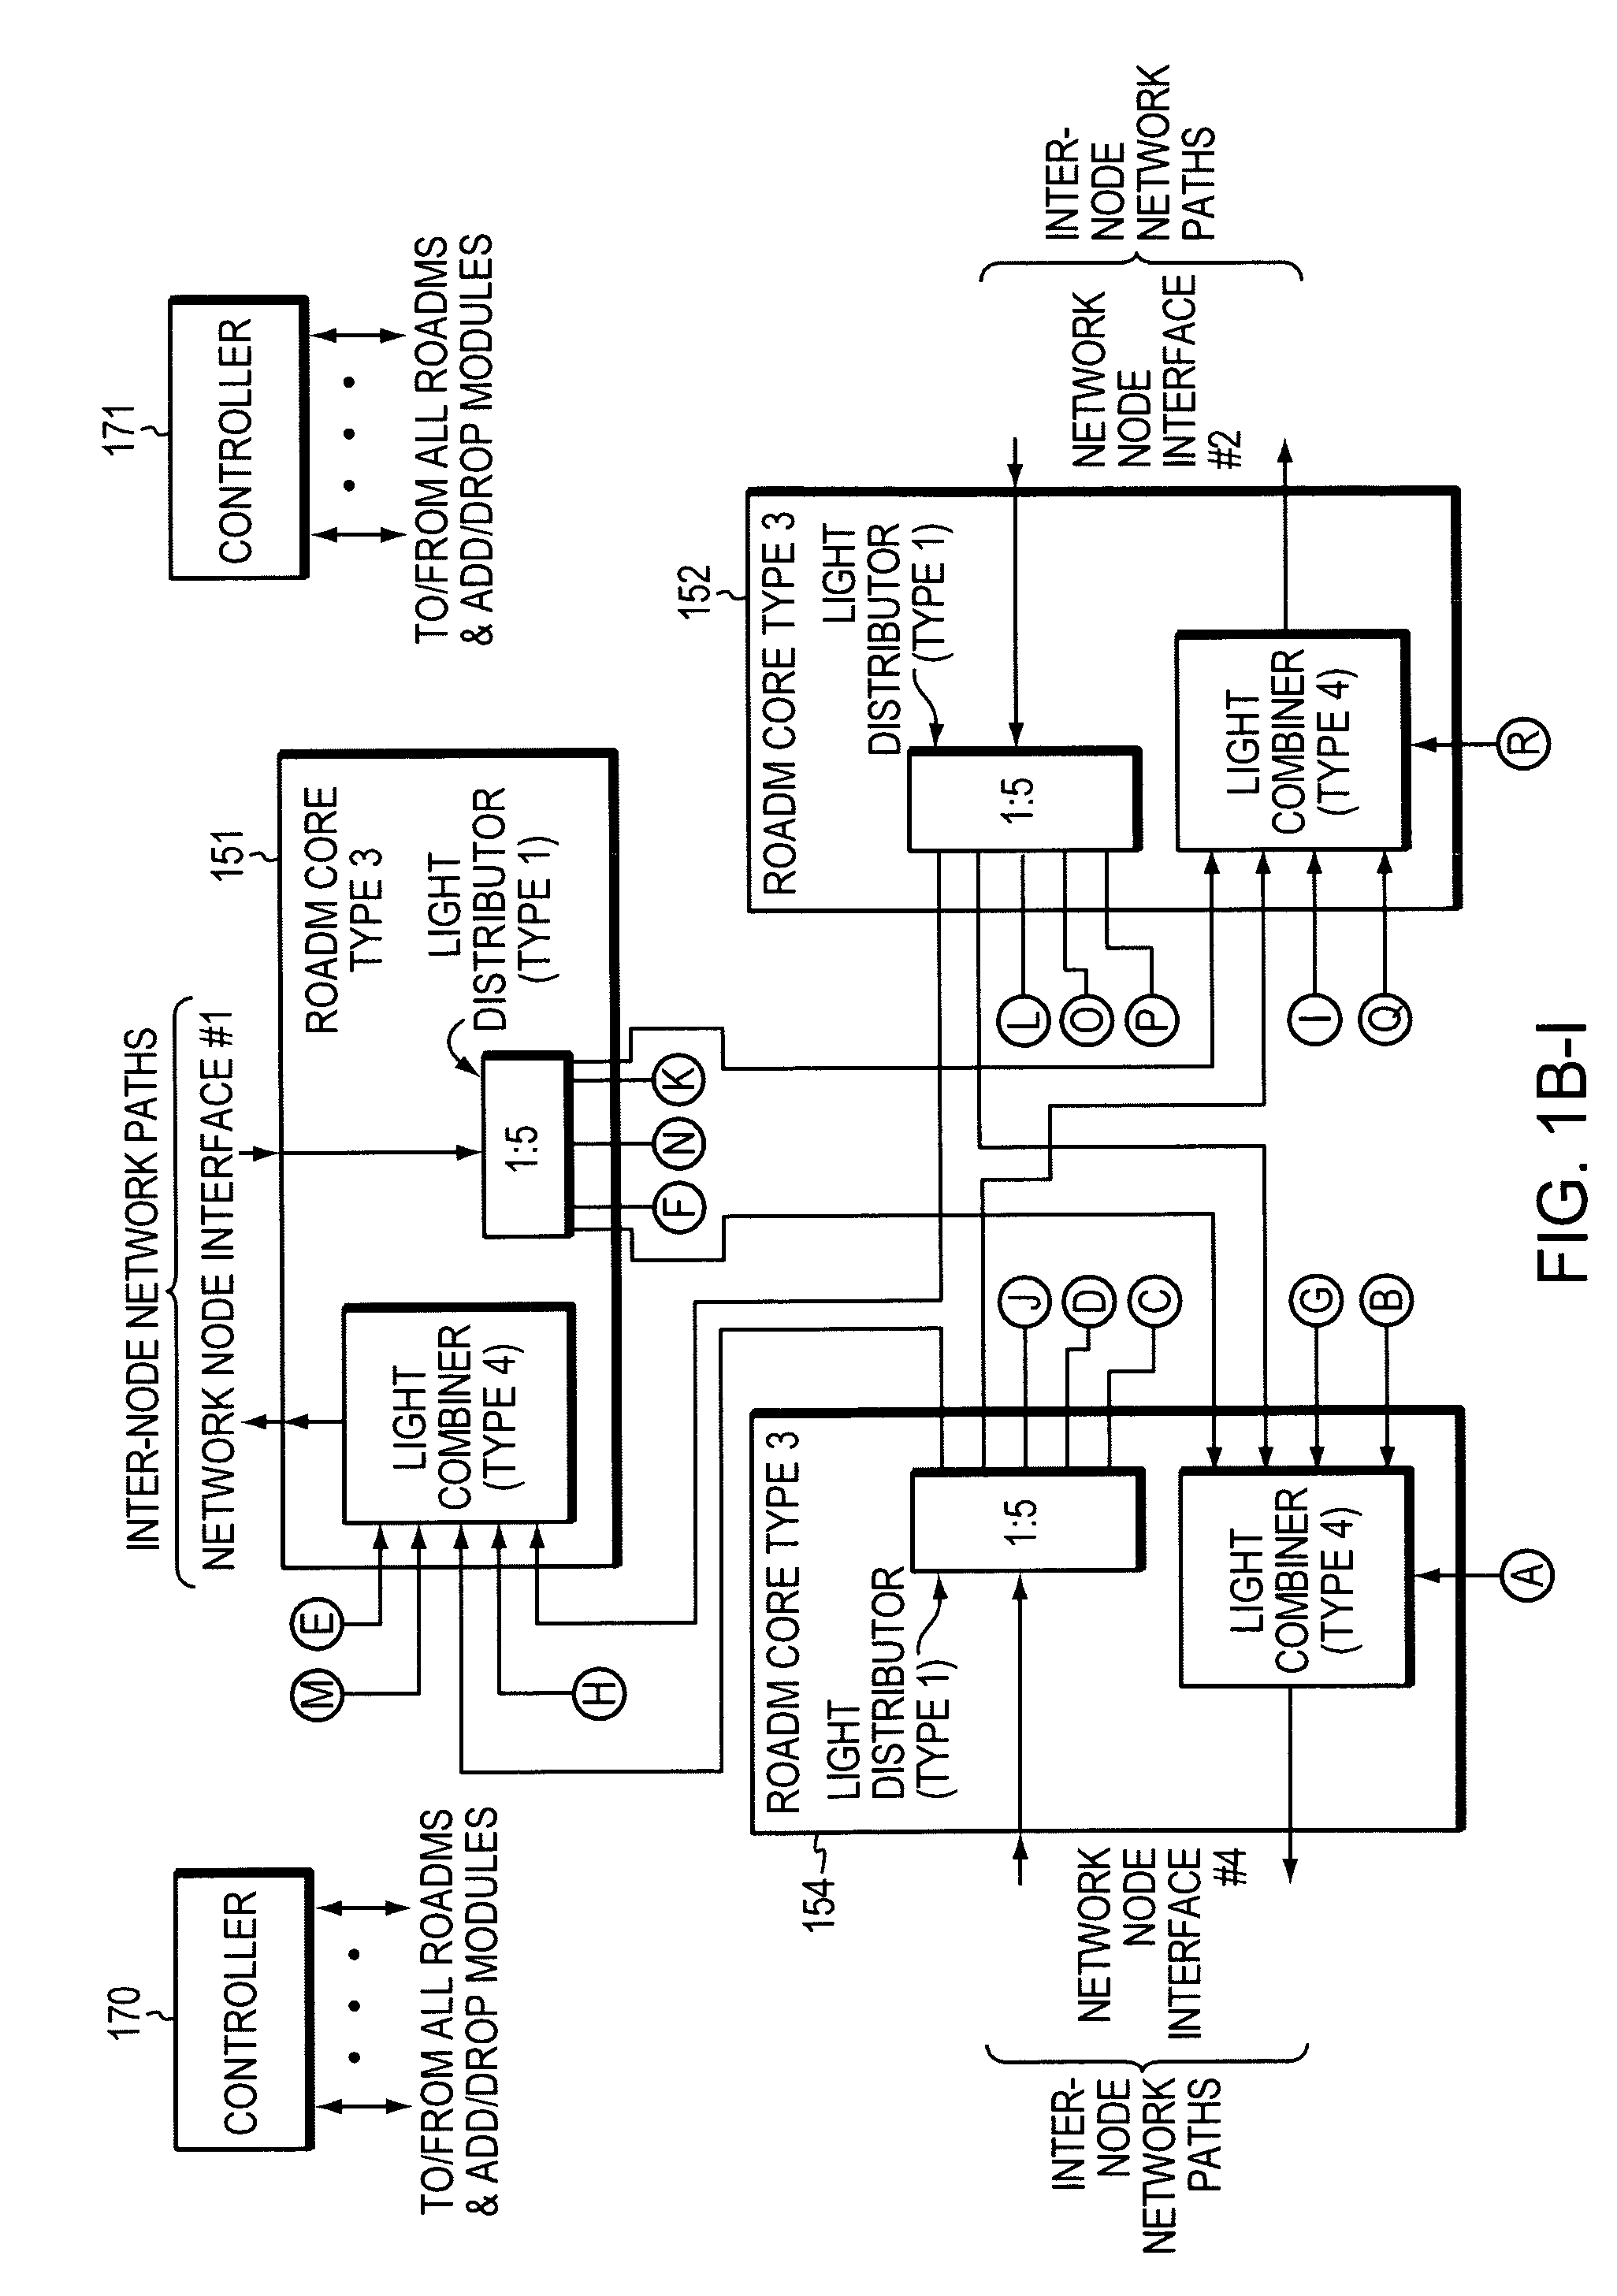 Methods and apparatus for performing directionless wavelength addition and subtraction within a ROADM based optical node